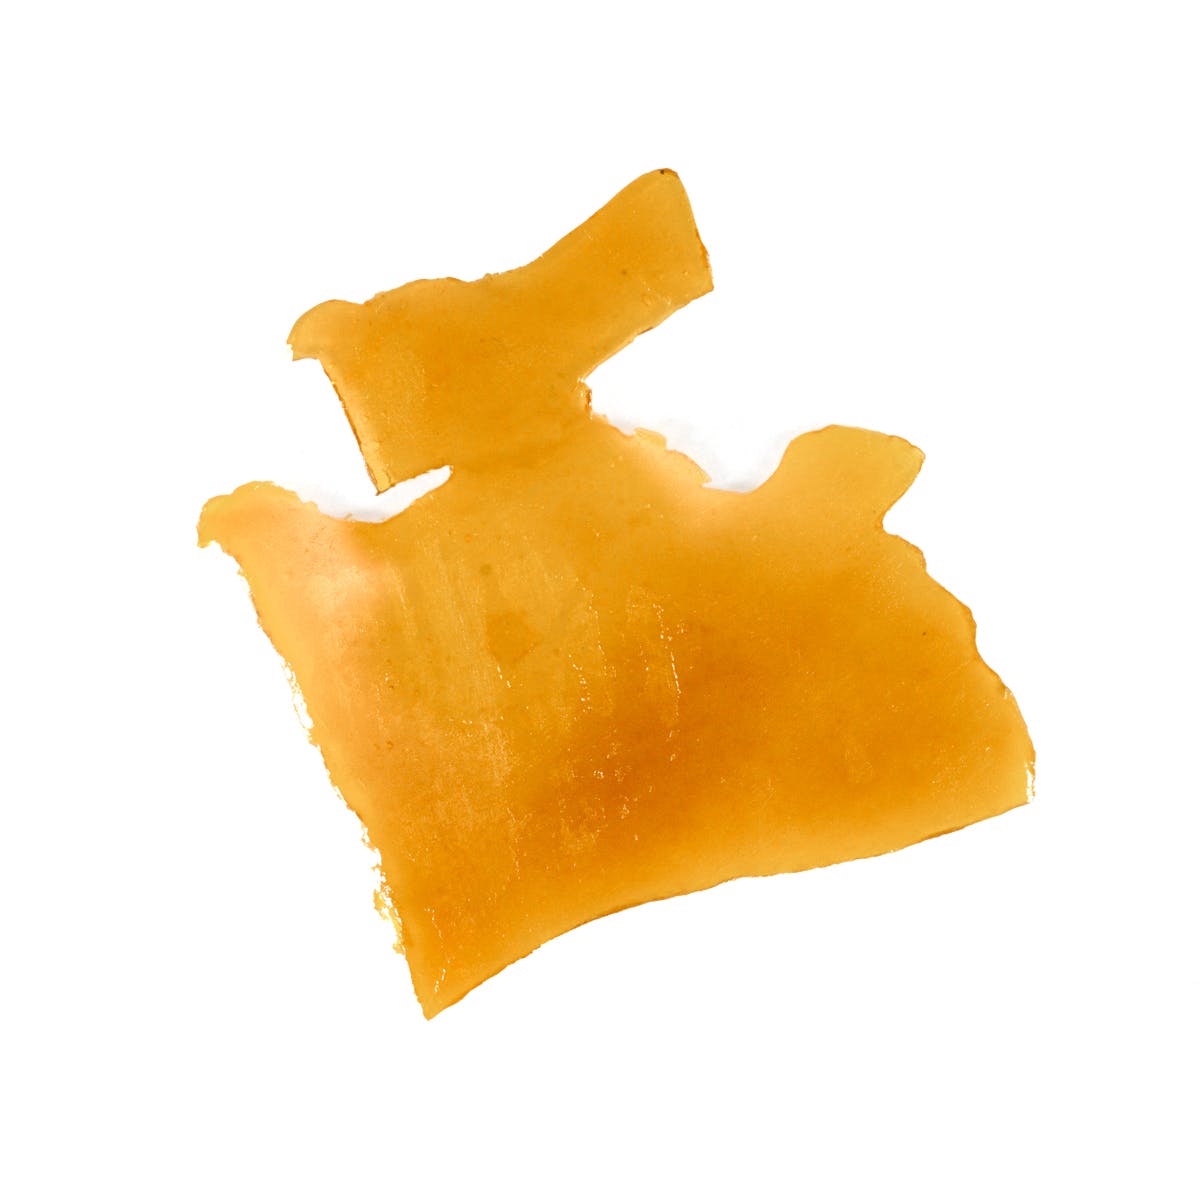 concentrate-strawberry-fields-shatter